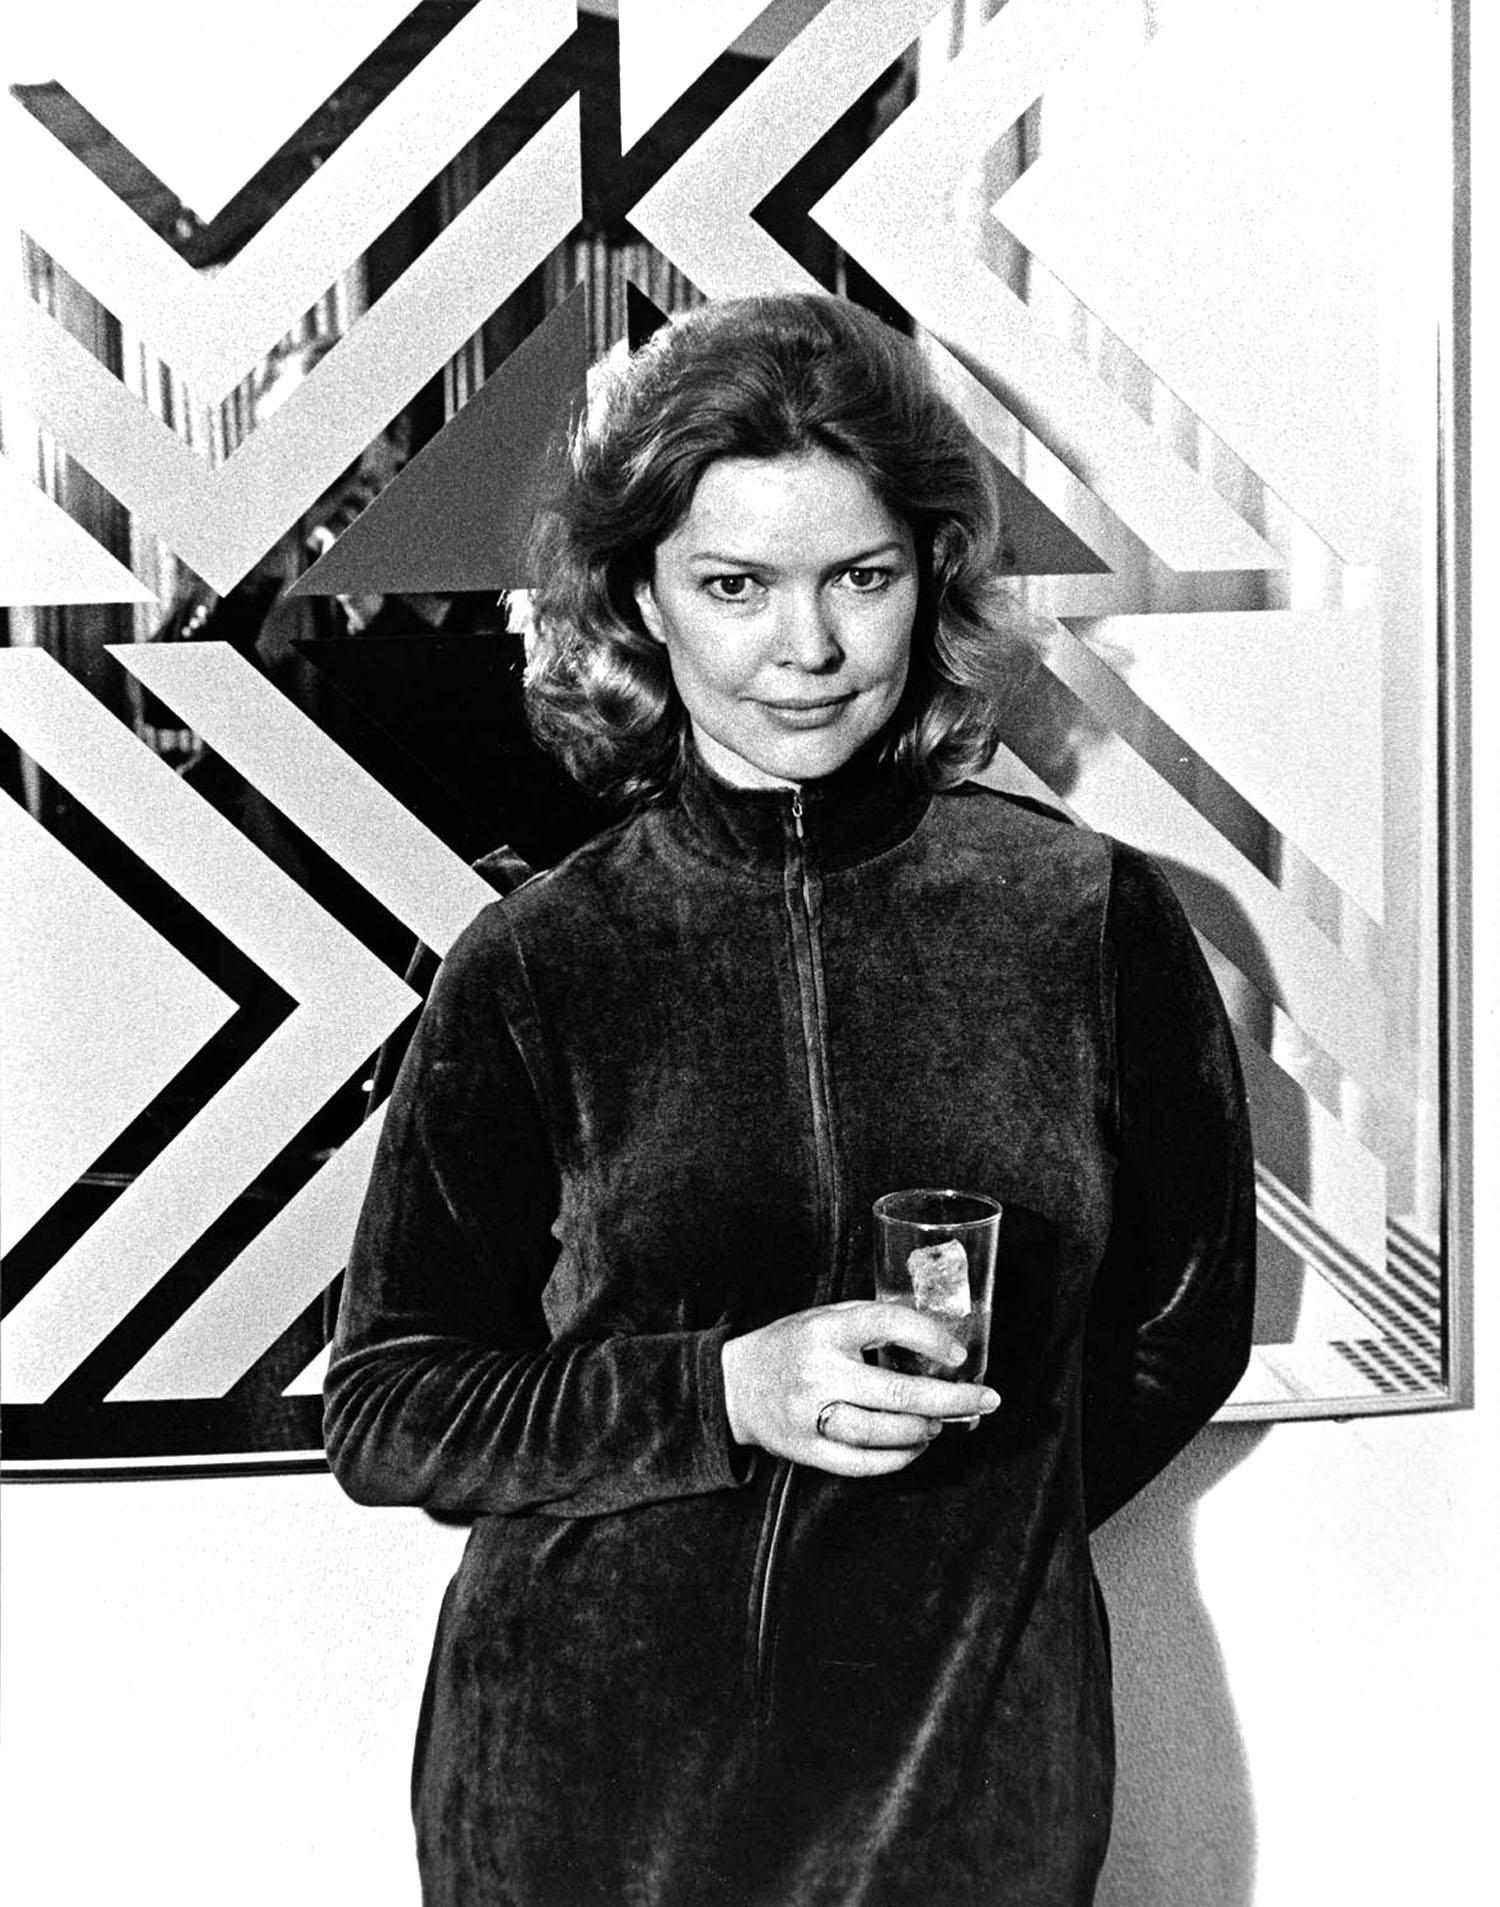 Jack Mitchell Black and White Photograph - Academy Award-winning actress ('Alice Doesn't Live Here Anymore') Ellen Burstyn